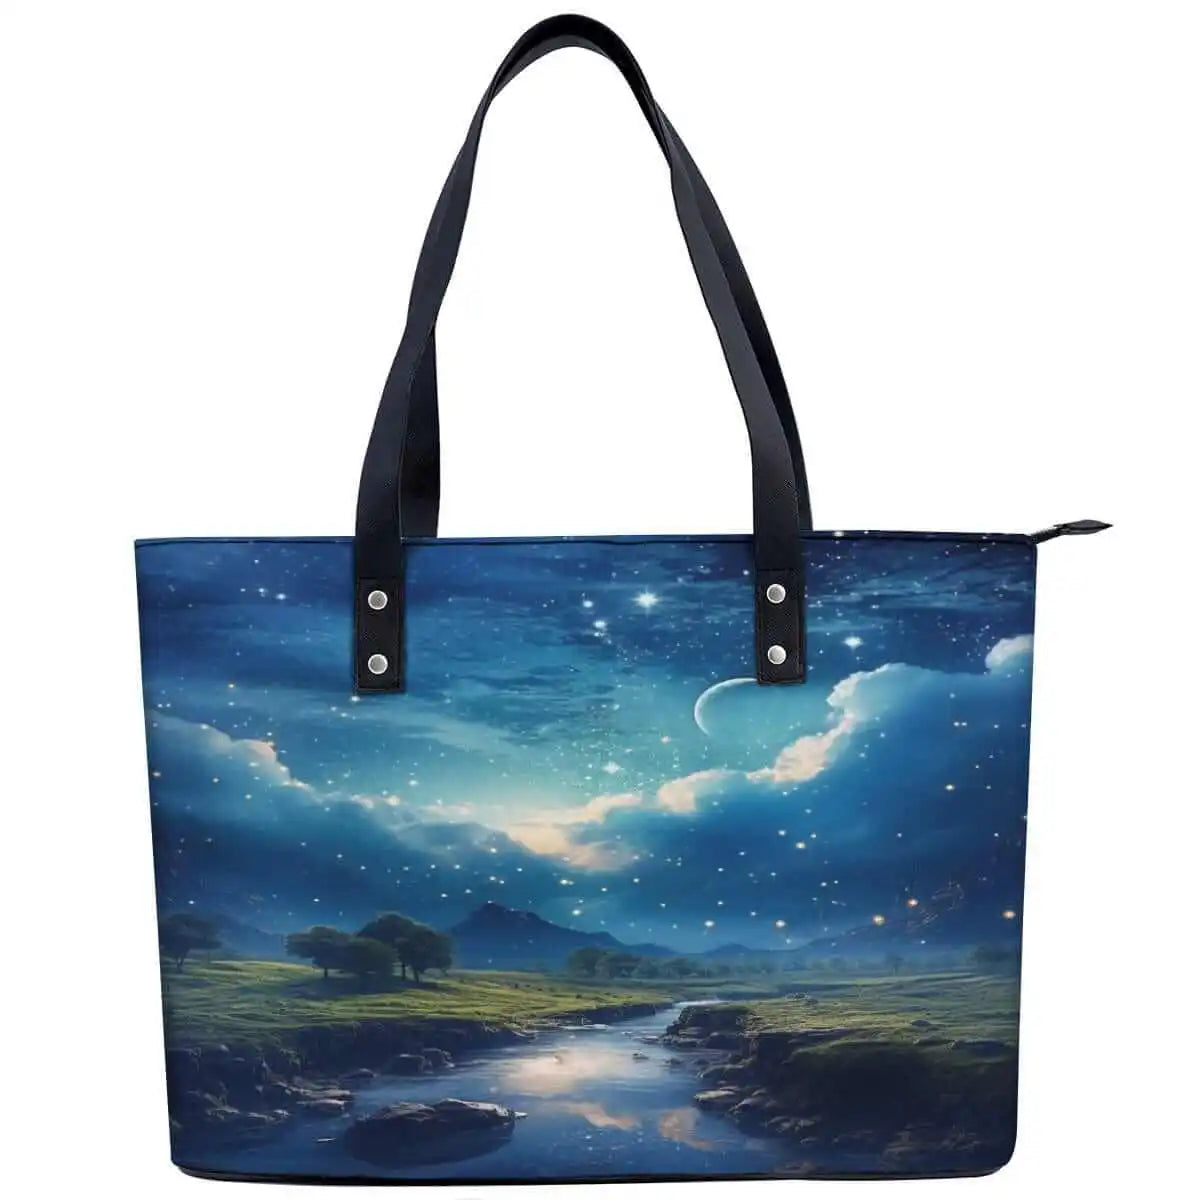 A Cloudy Day Cotton Canvas Premium Quality Tote Bag